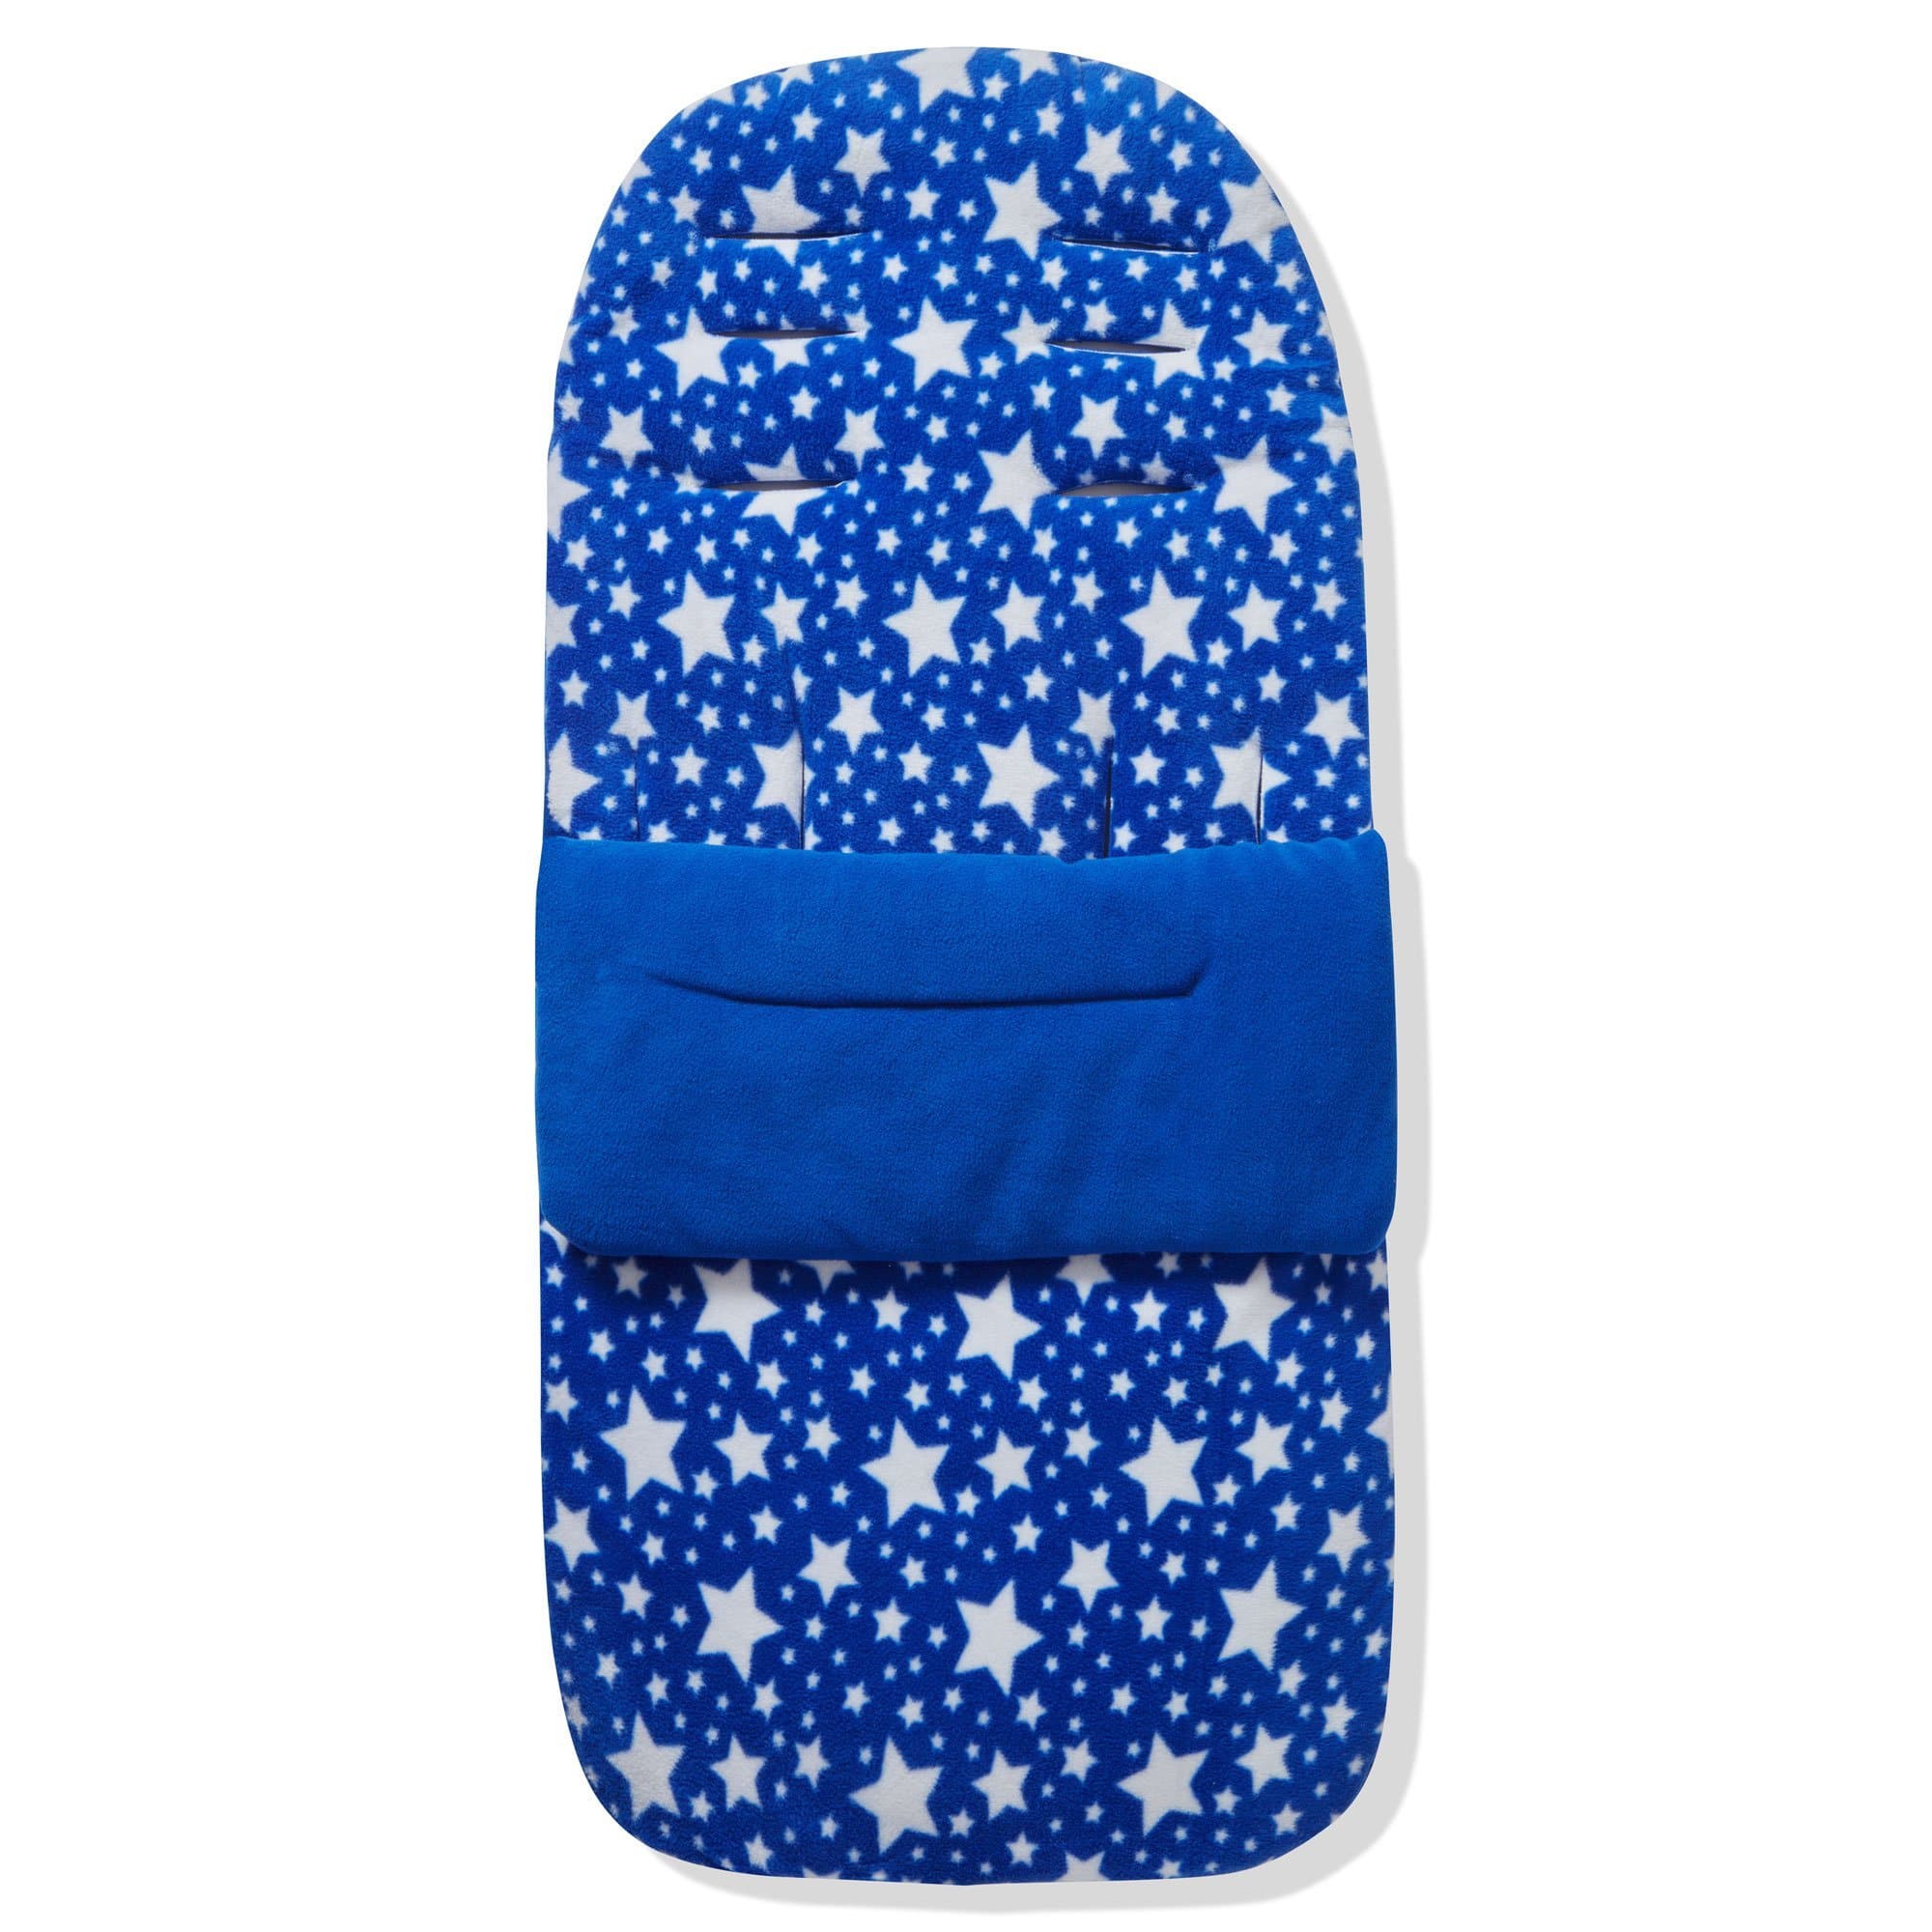 Fleece Footmuff / Cosy Toes Compatible with Babylo - Blue Star / Fits All Models | For Your Little One